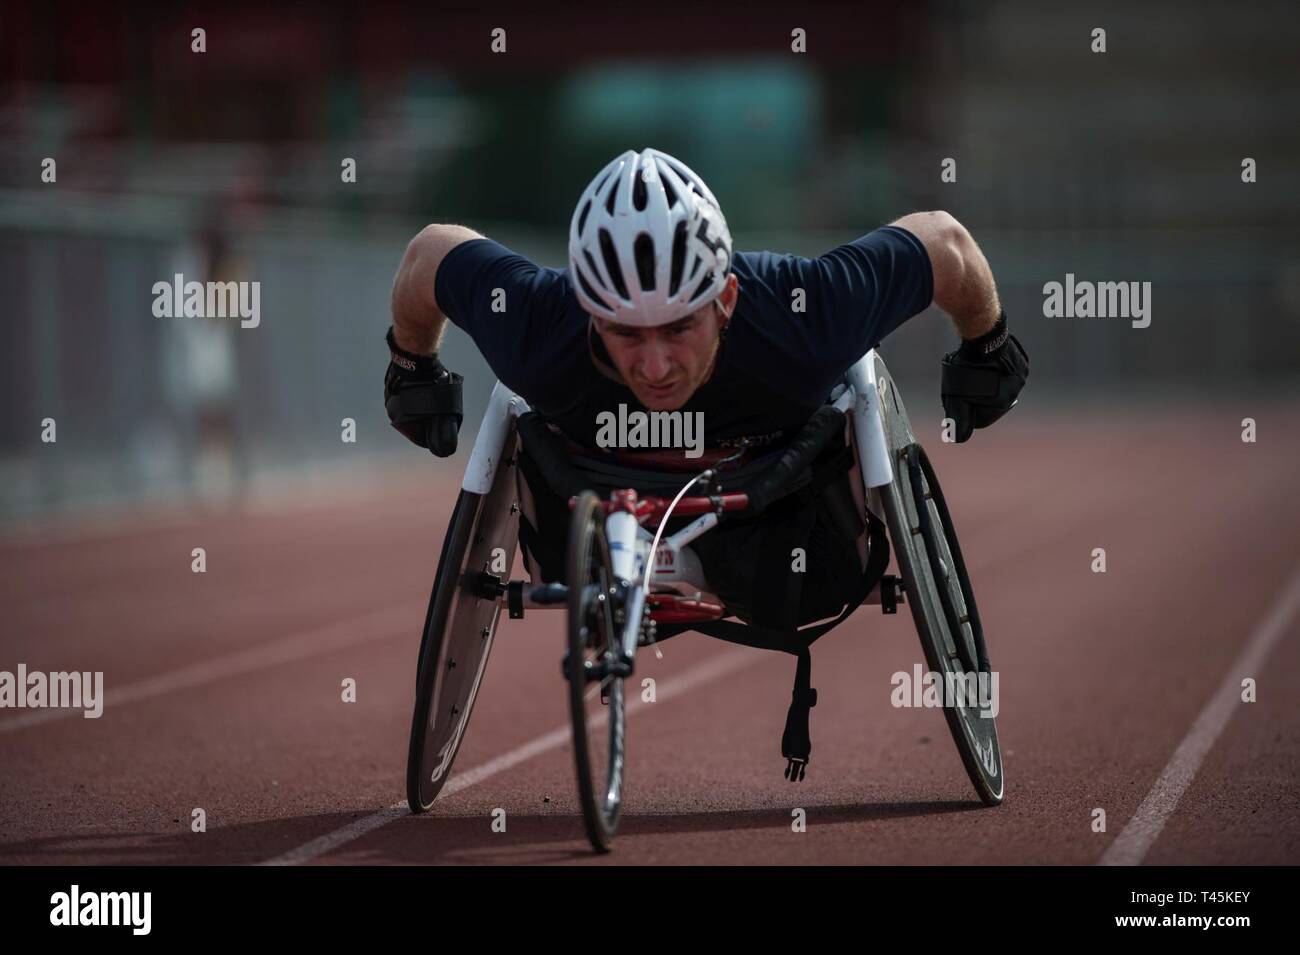 A Georgian athlete practices on the track during the 2019 Marine Corps Trials at Marine Corps Base Camp Pendleton, California, March 1. The Marine Corps Trials promotes recovery and rehabilitation through adaptive sports participation and develops camaraderie among recovering service members and veterans. Additionally, the competition is an opportunity for participants to demonstrate physical and mental achievements and serves as the primary venue to select Marine Corps participants for the DoD Warrior Games. Stock Photo